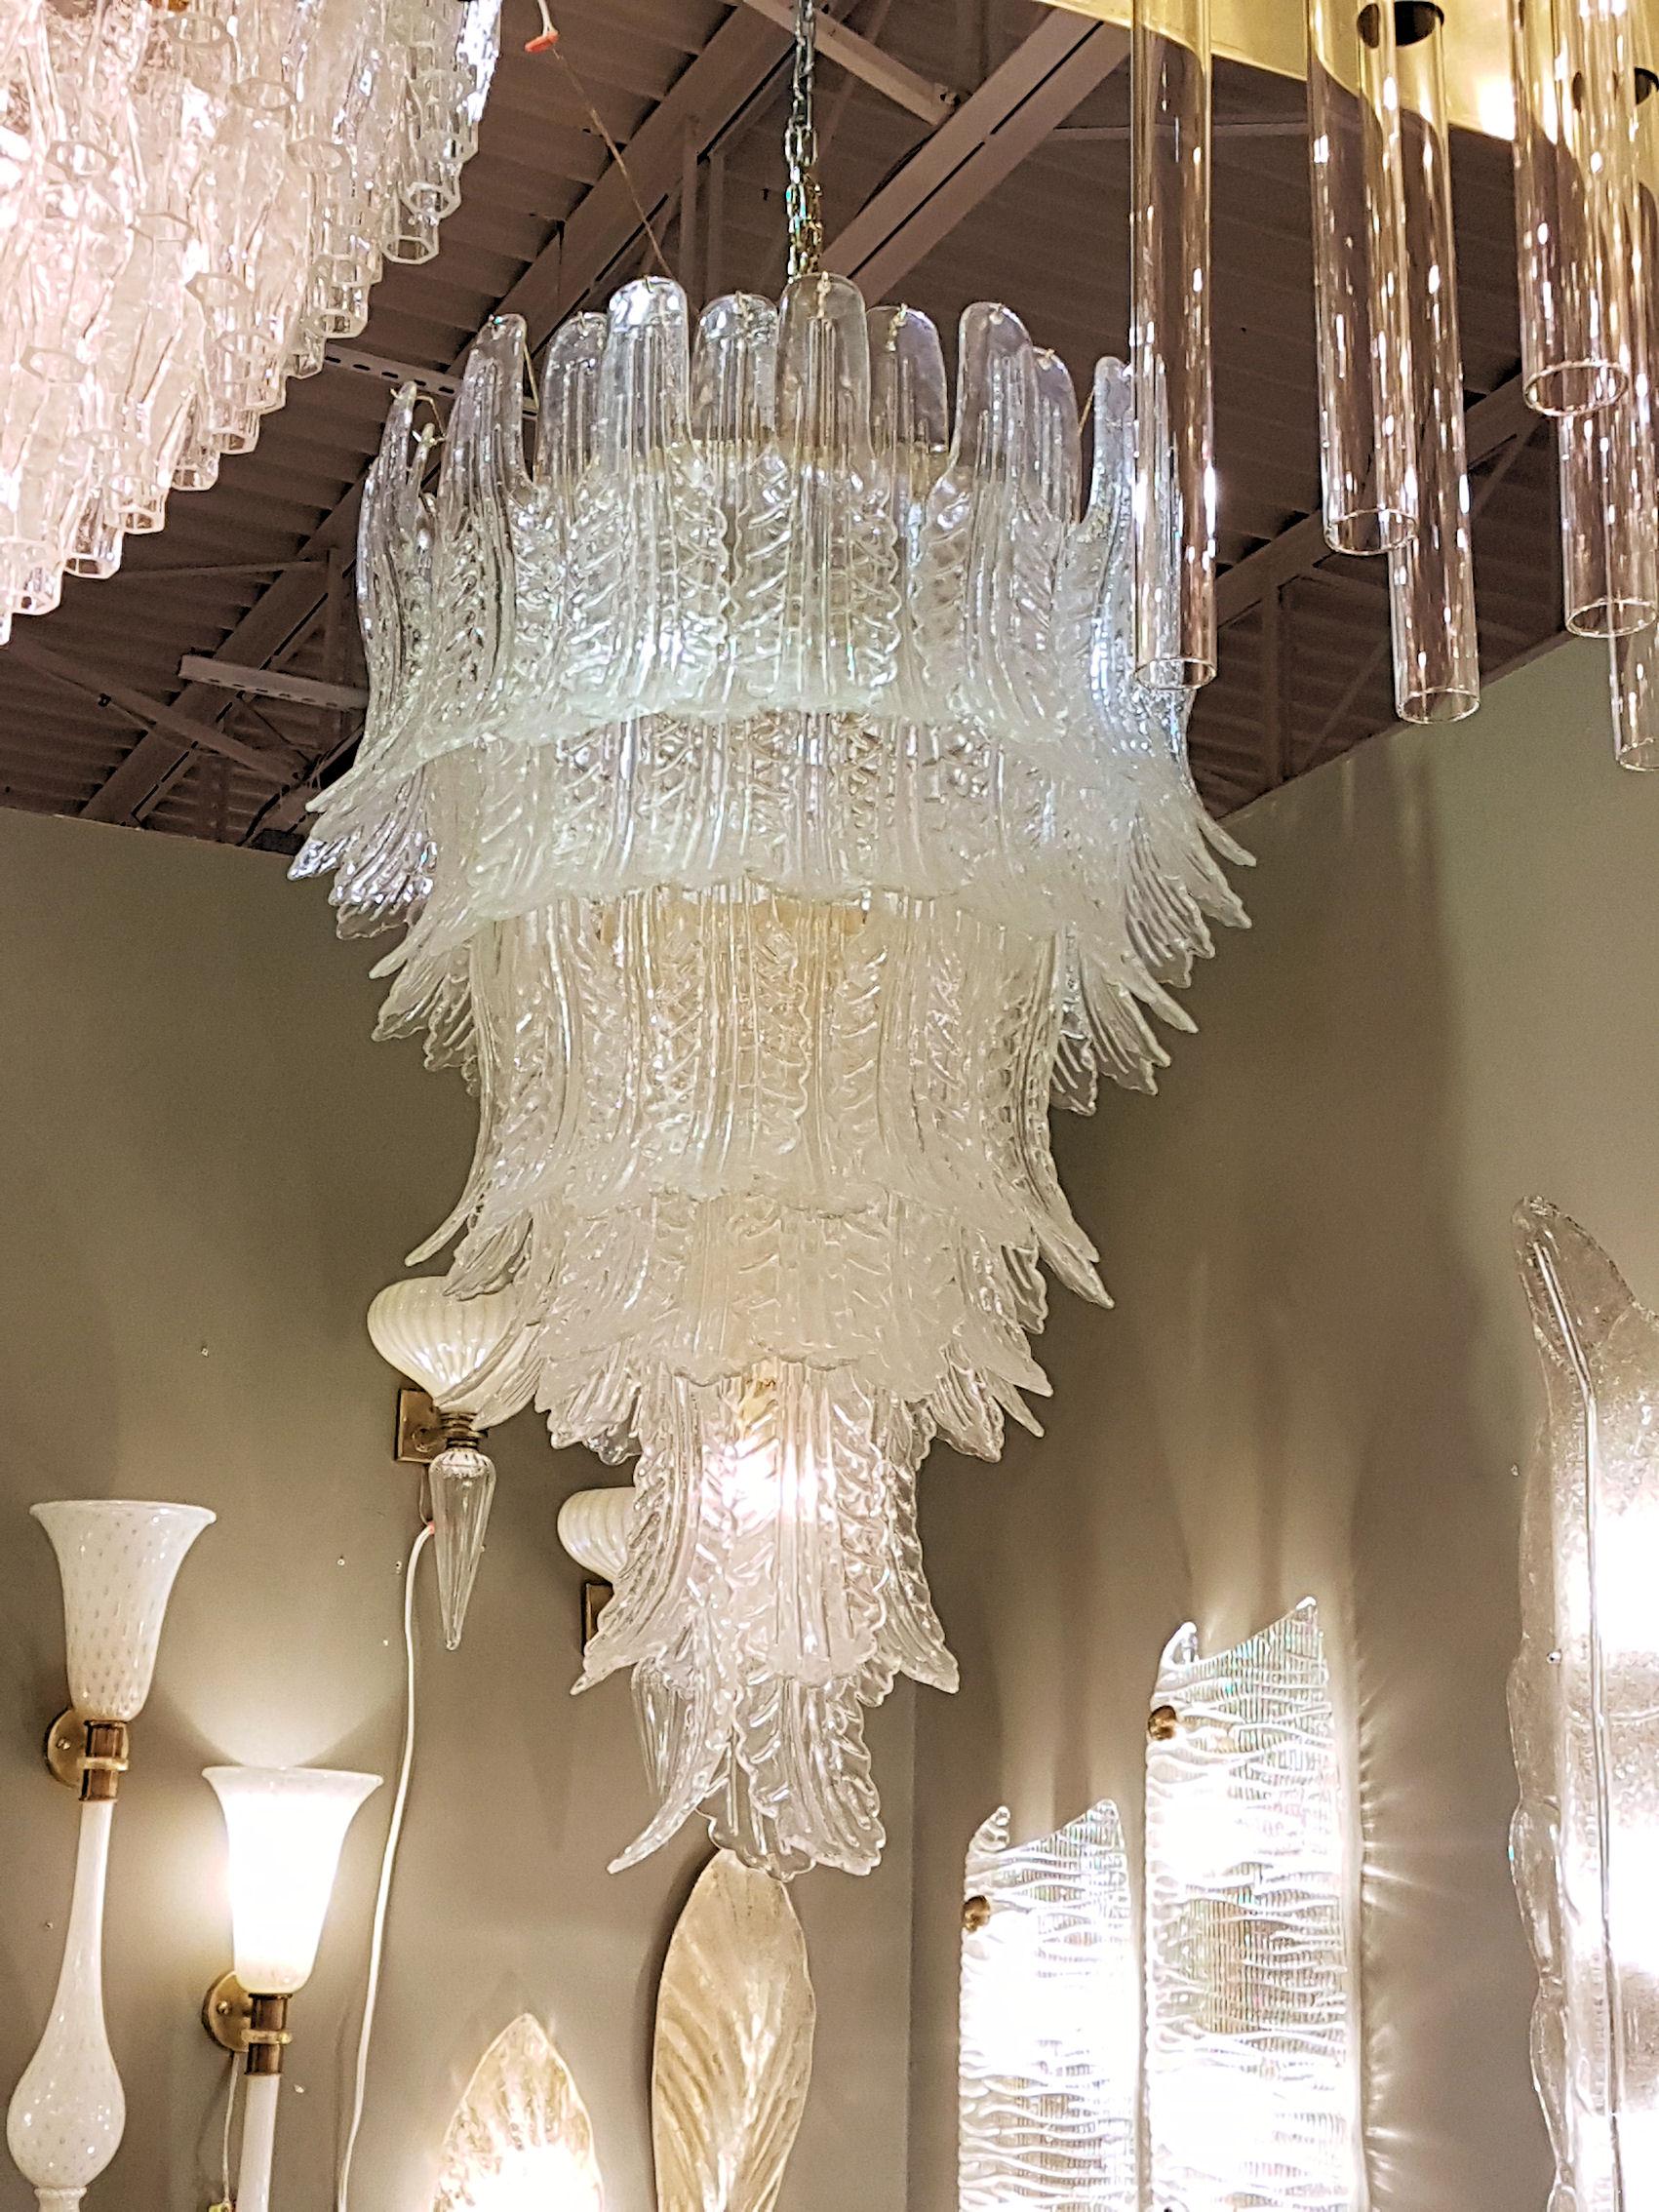 Extra large clear Murano glass Mid-Century Modern chandelier, attributed to Barovier & Toso, Italy, 1960s.
6 tiers of clear textured handmade curved Murano glass leaves.
Approximately 110 pieces of glass.
Modern or classic, easy to fit in any